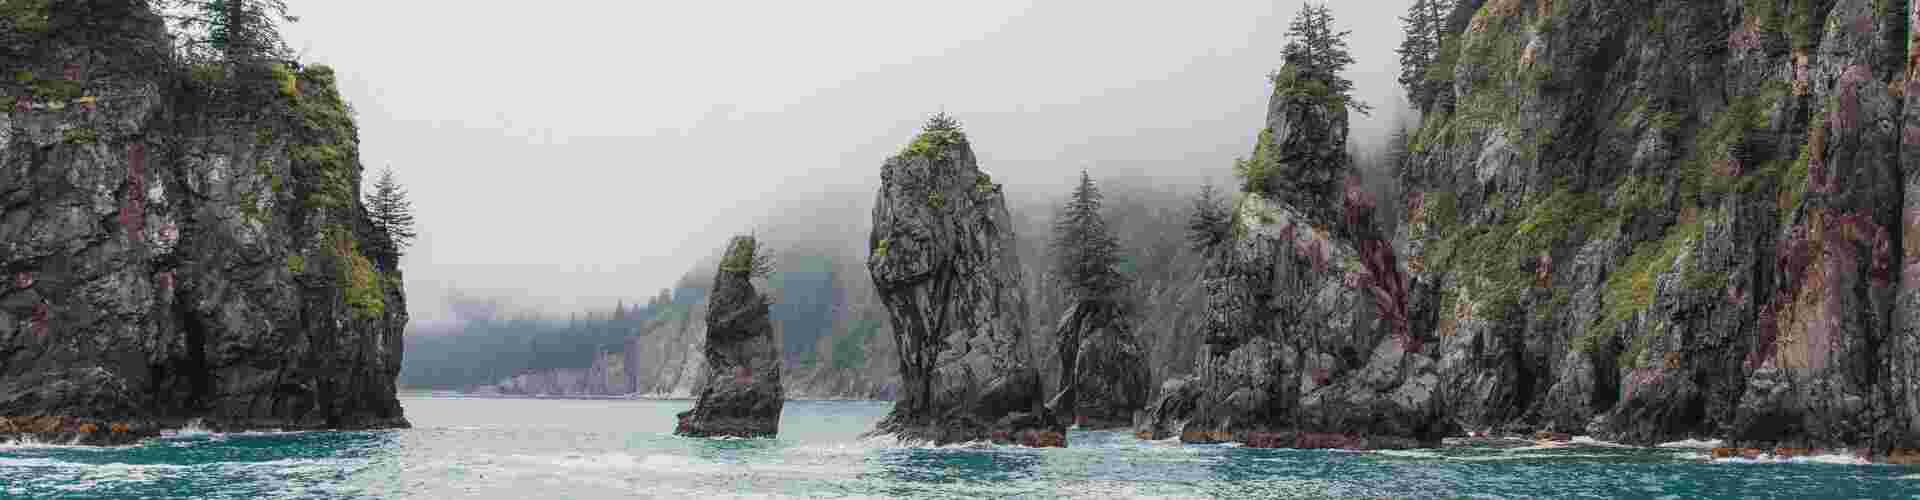 Kenai Fjords National Park from the water